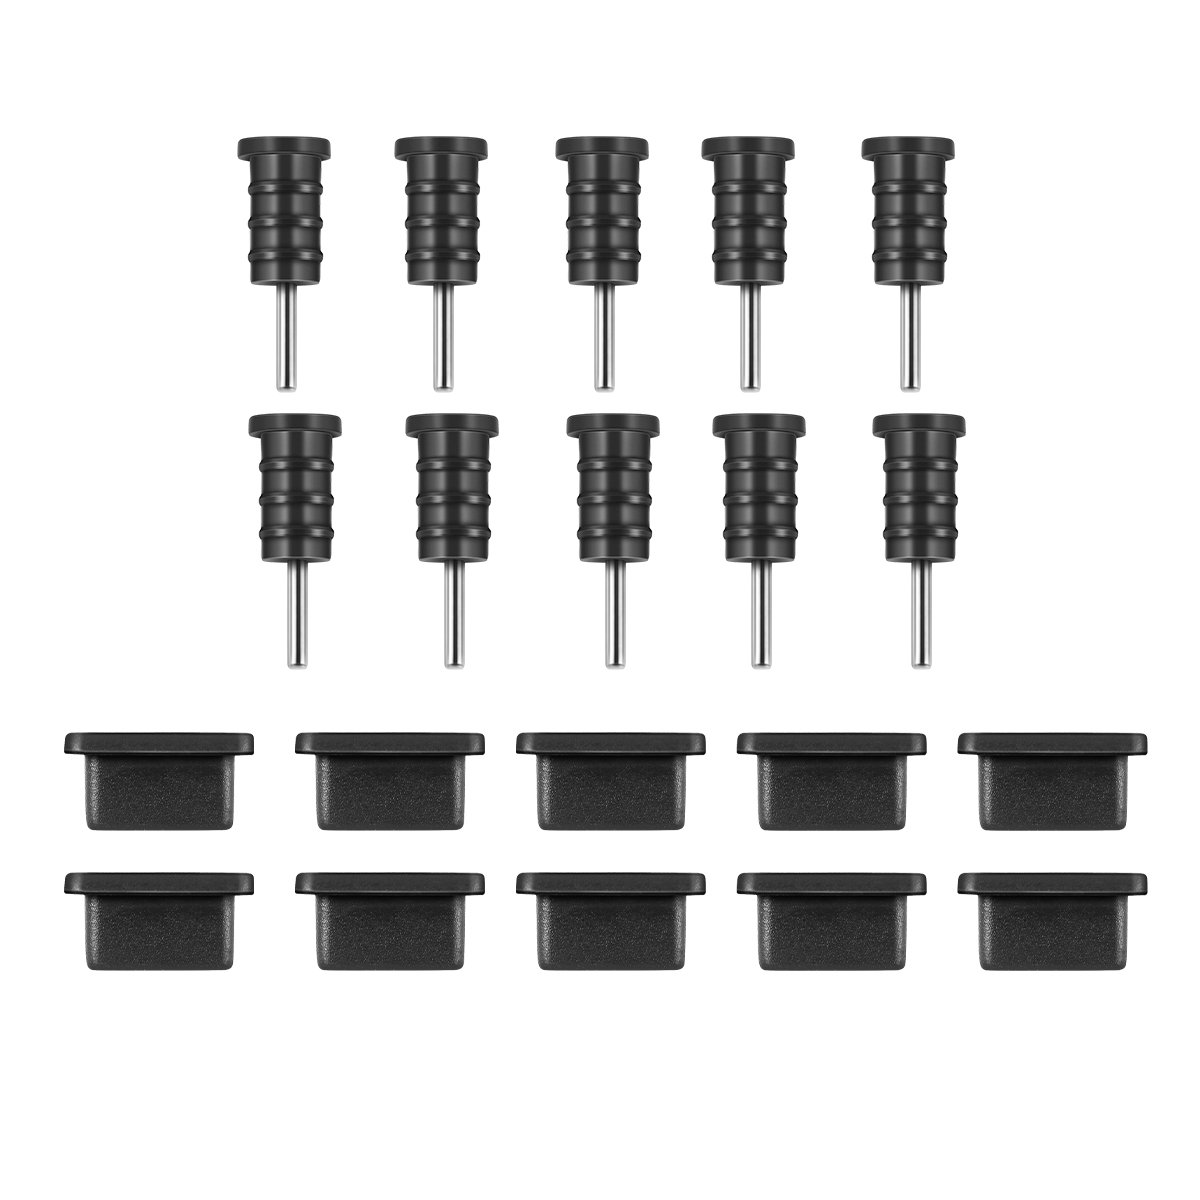 UKCOCO 10 Pairs USB Type Anti Dust Protective Cover Silicone Port Plug Cover(Black)